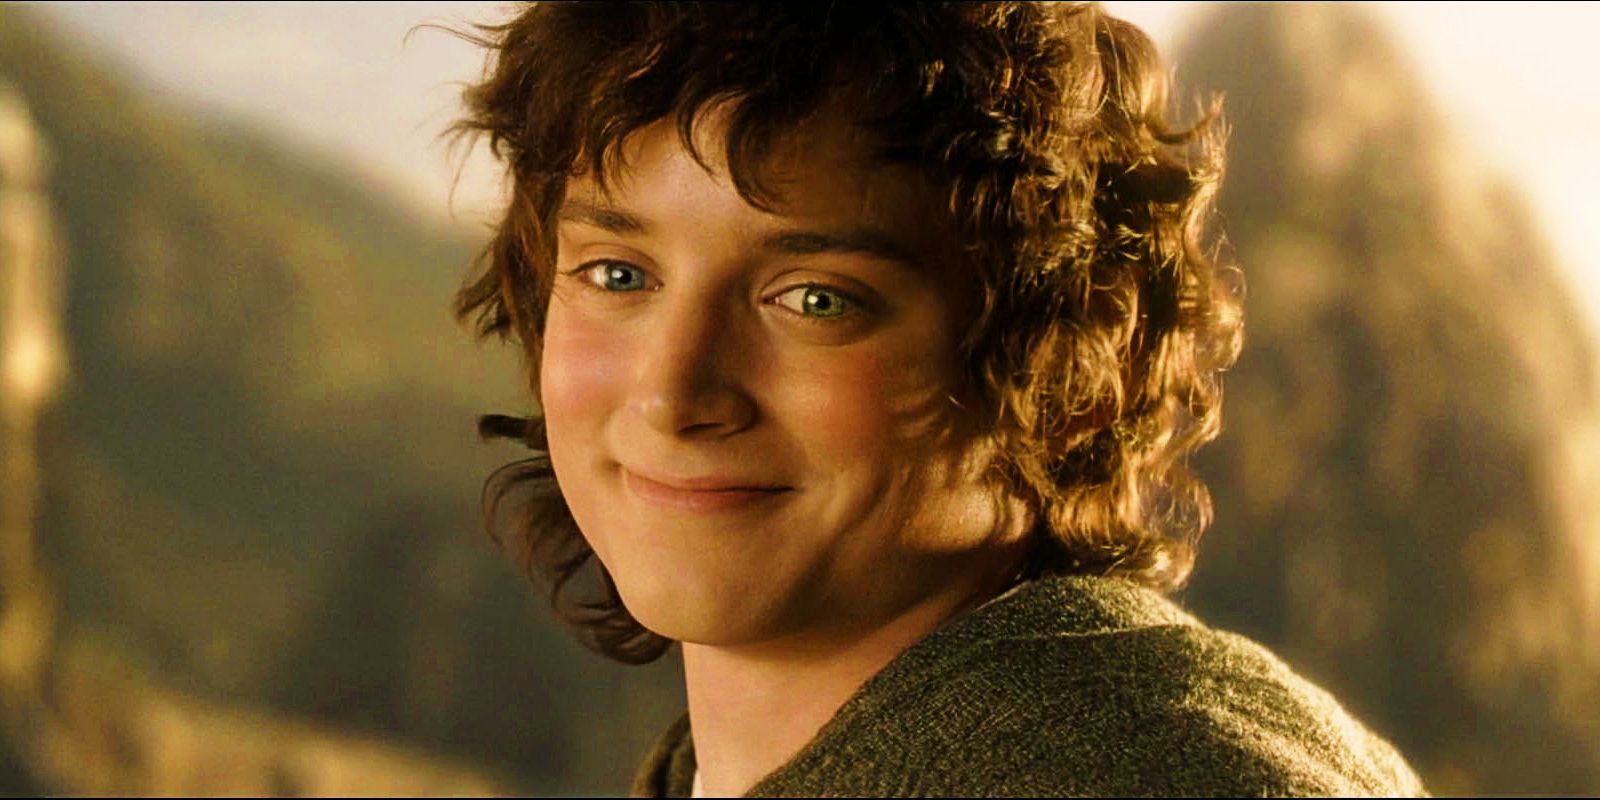 Frodo smiling at the end of Return of the King